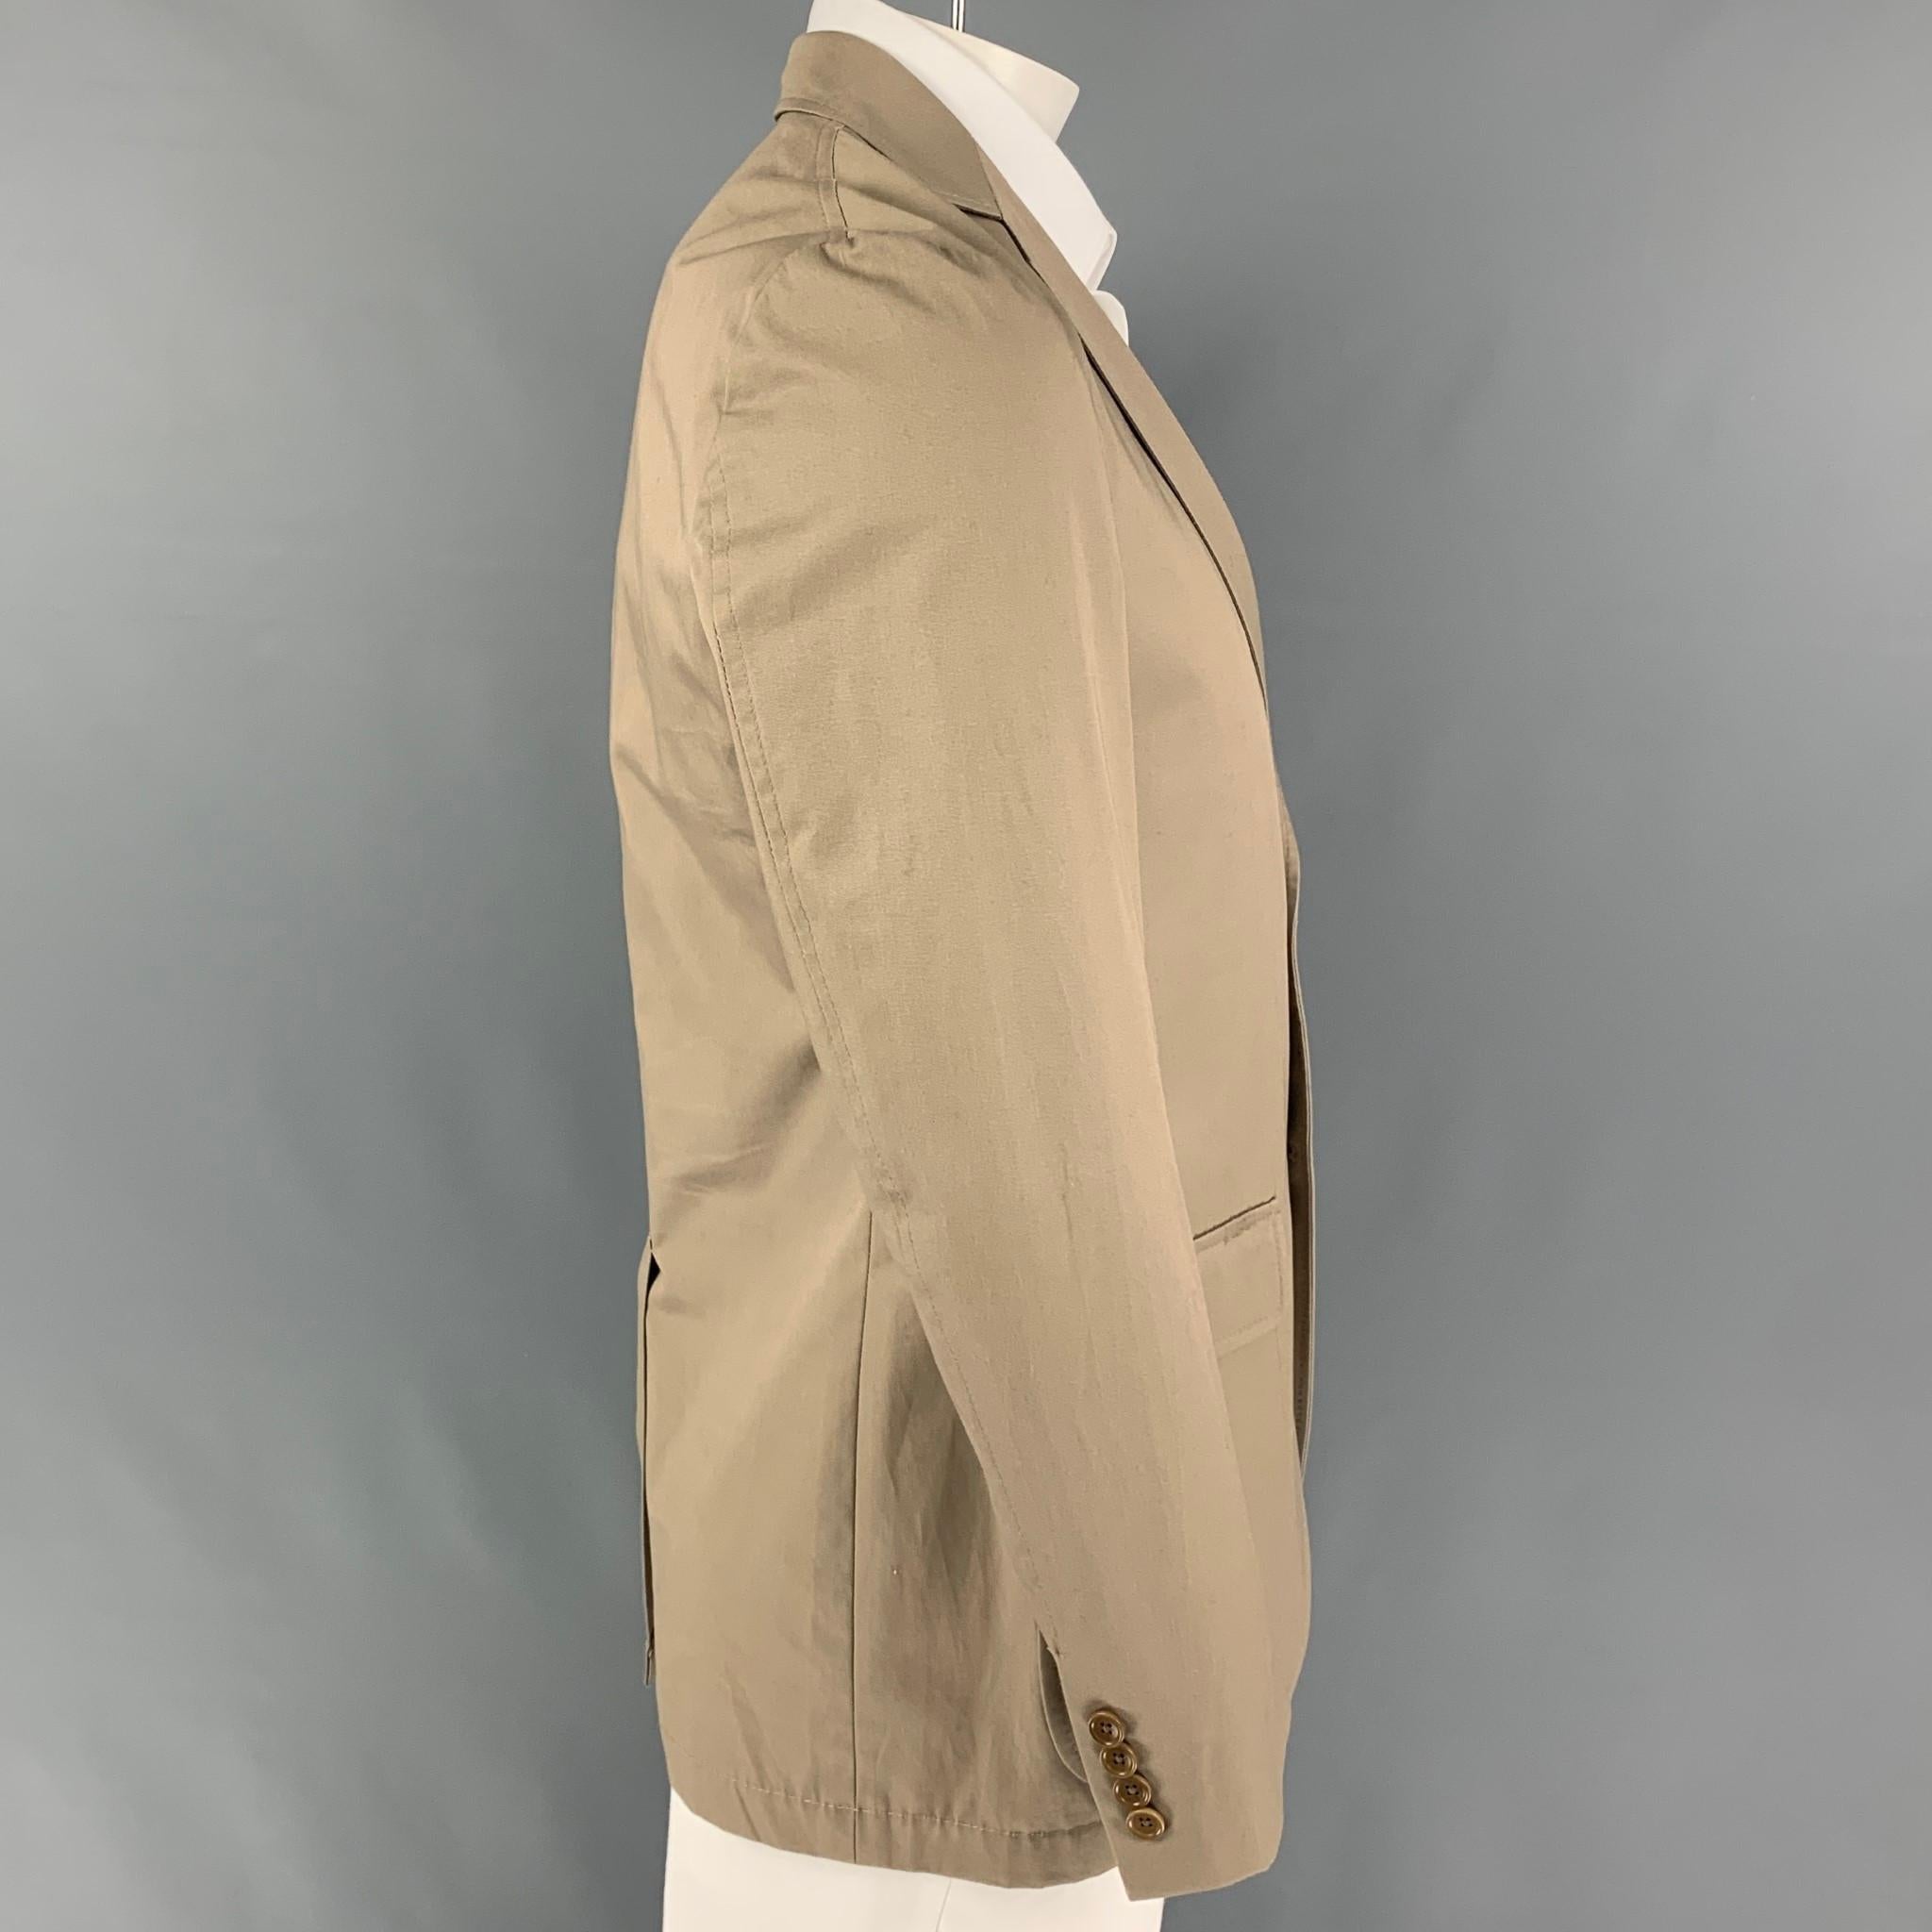 GITMAN BROS for UNIONMADE sport coat comes in a khaki cotton with a half liner featuring a notch lapel, flap pockets, single back vent, and a three button closure. 

Very Good Pre-Owned Condition.
Marked: 40

Measurements:

Shoulder: 18 in.
Chest: